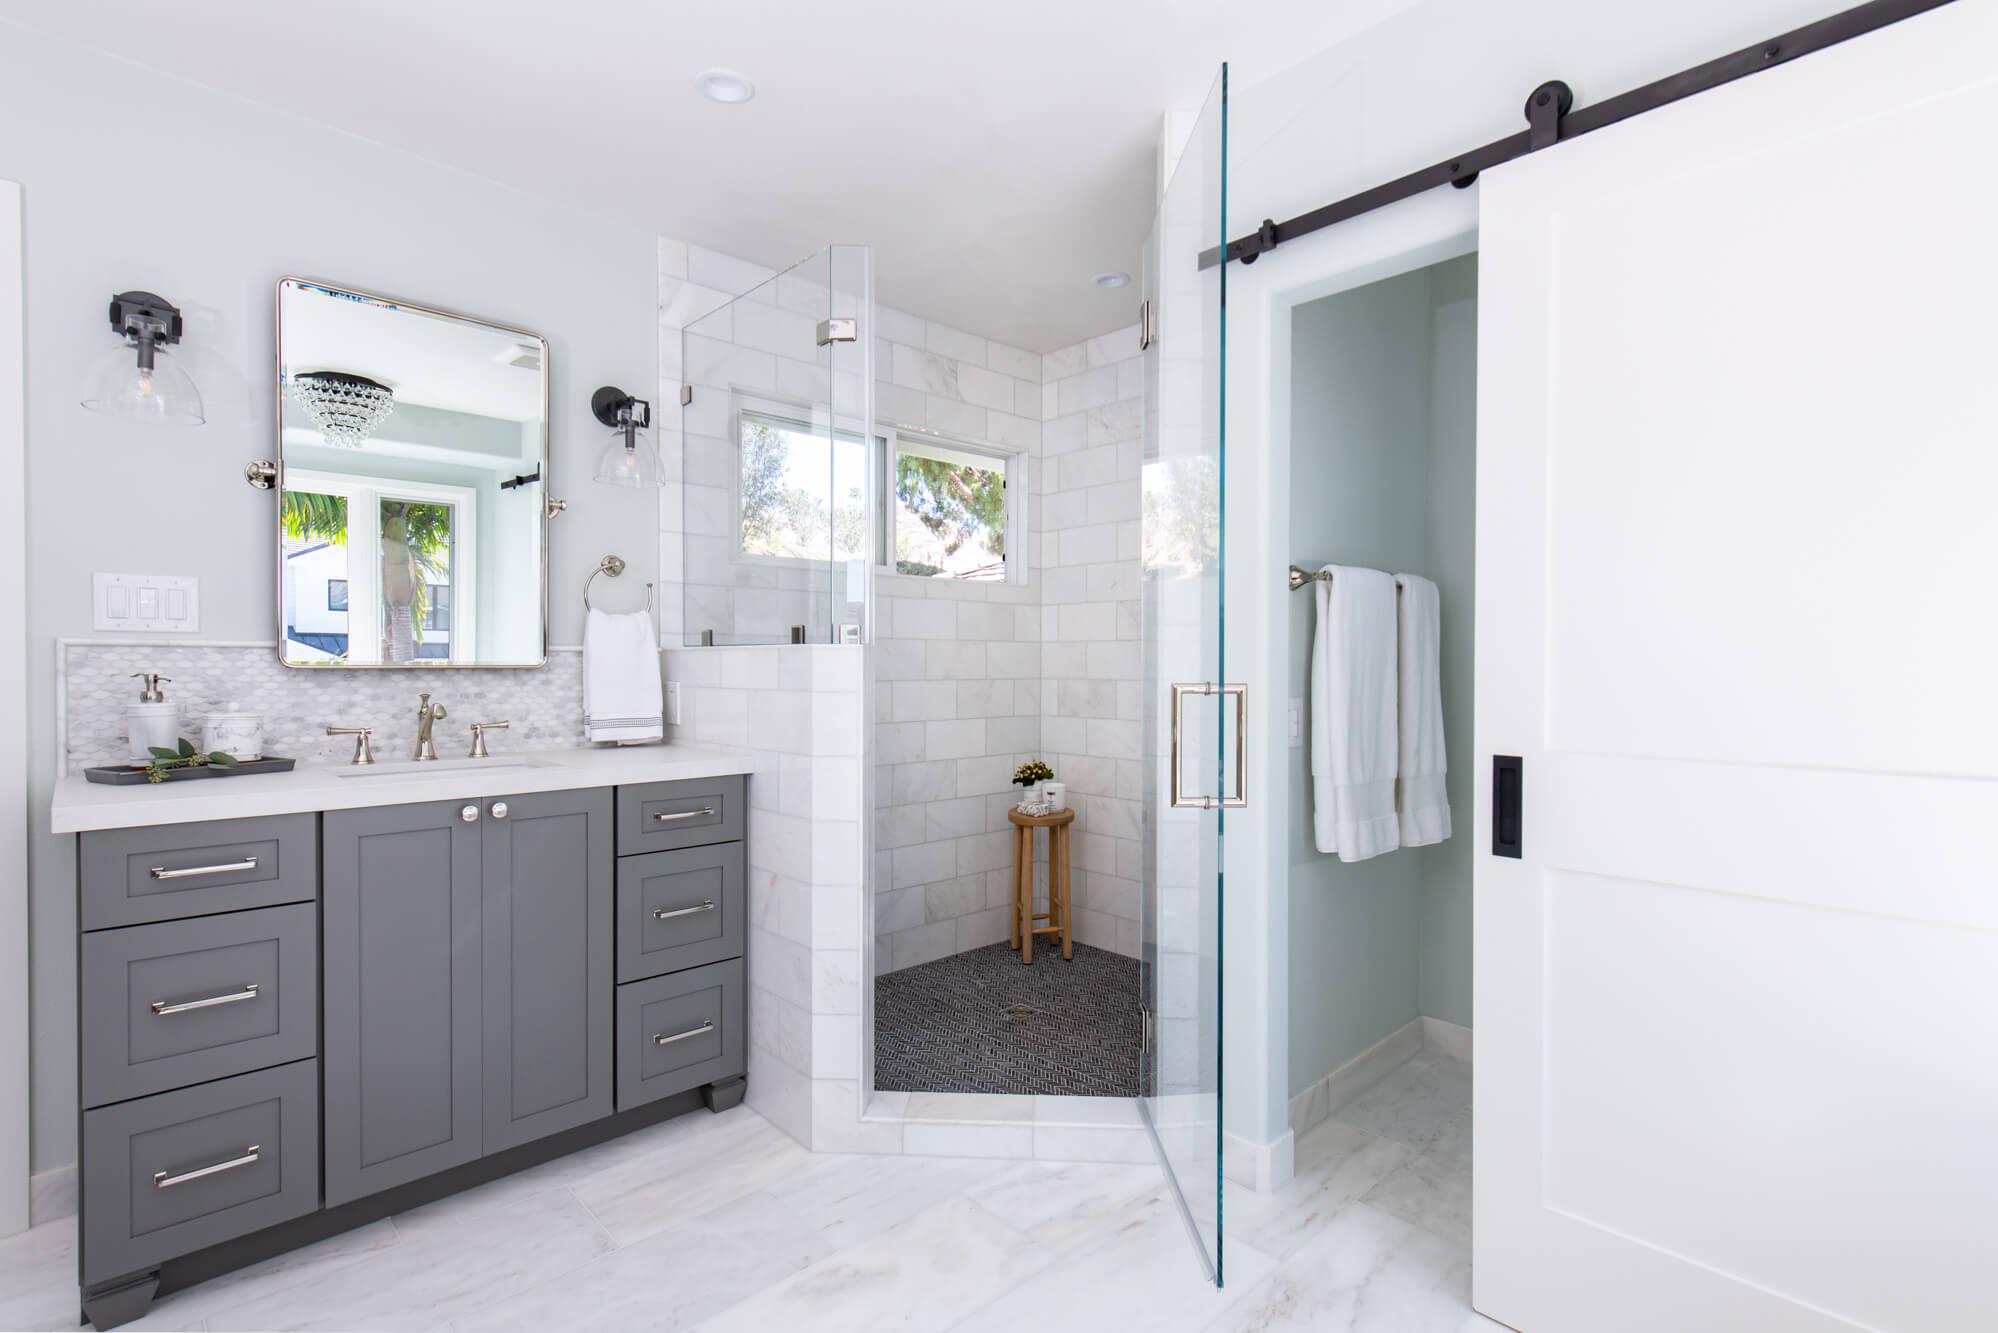 Marble Flooring and Shower Tile With Gray Cabinetry in Bathroom Remodel